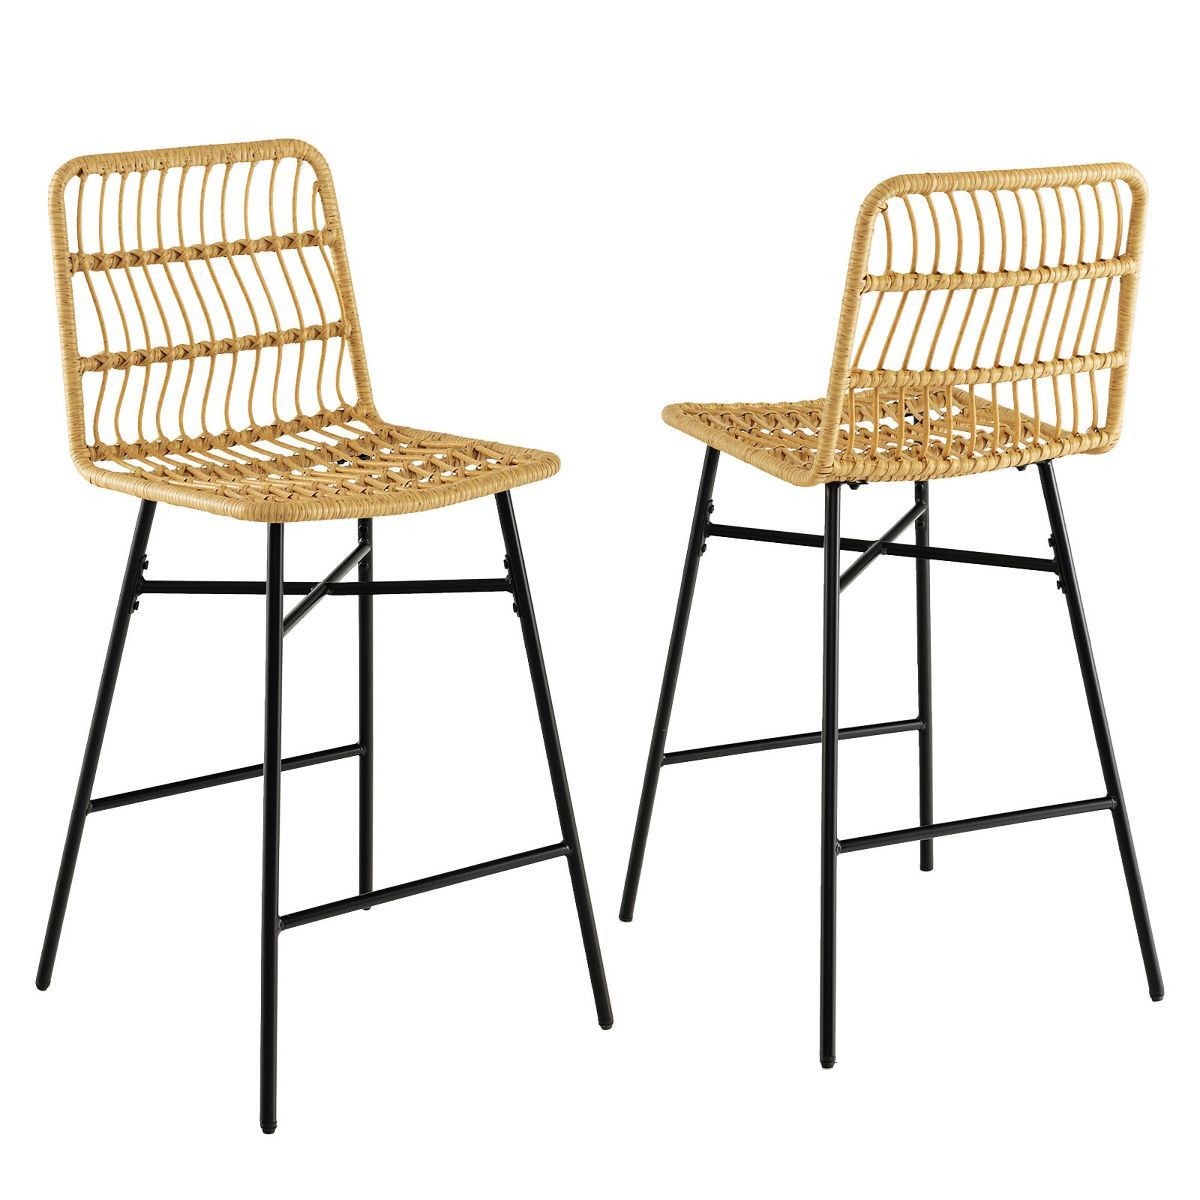 Costway Set of 2 Rattan Bar Stools Counter Height Dining Chairs with Metal Legs Natural | Target